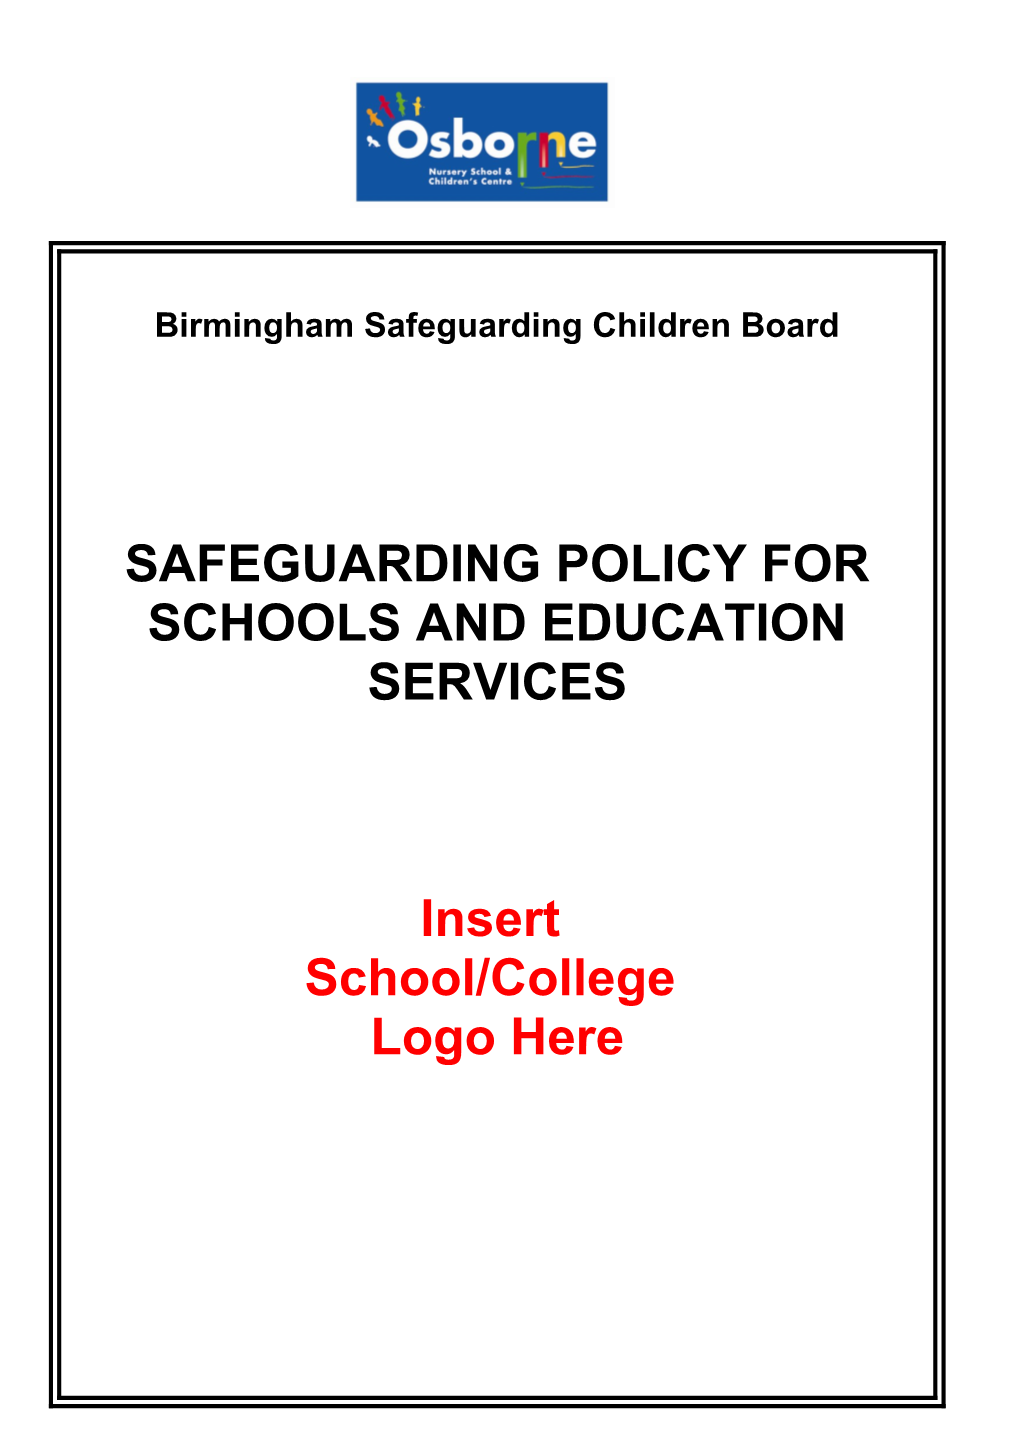 Safeguarding Policy for Schools and Education Services - Sept